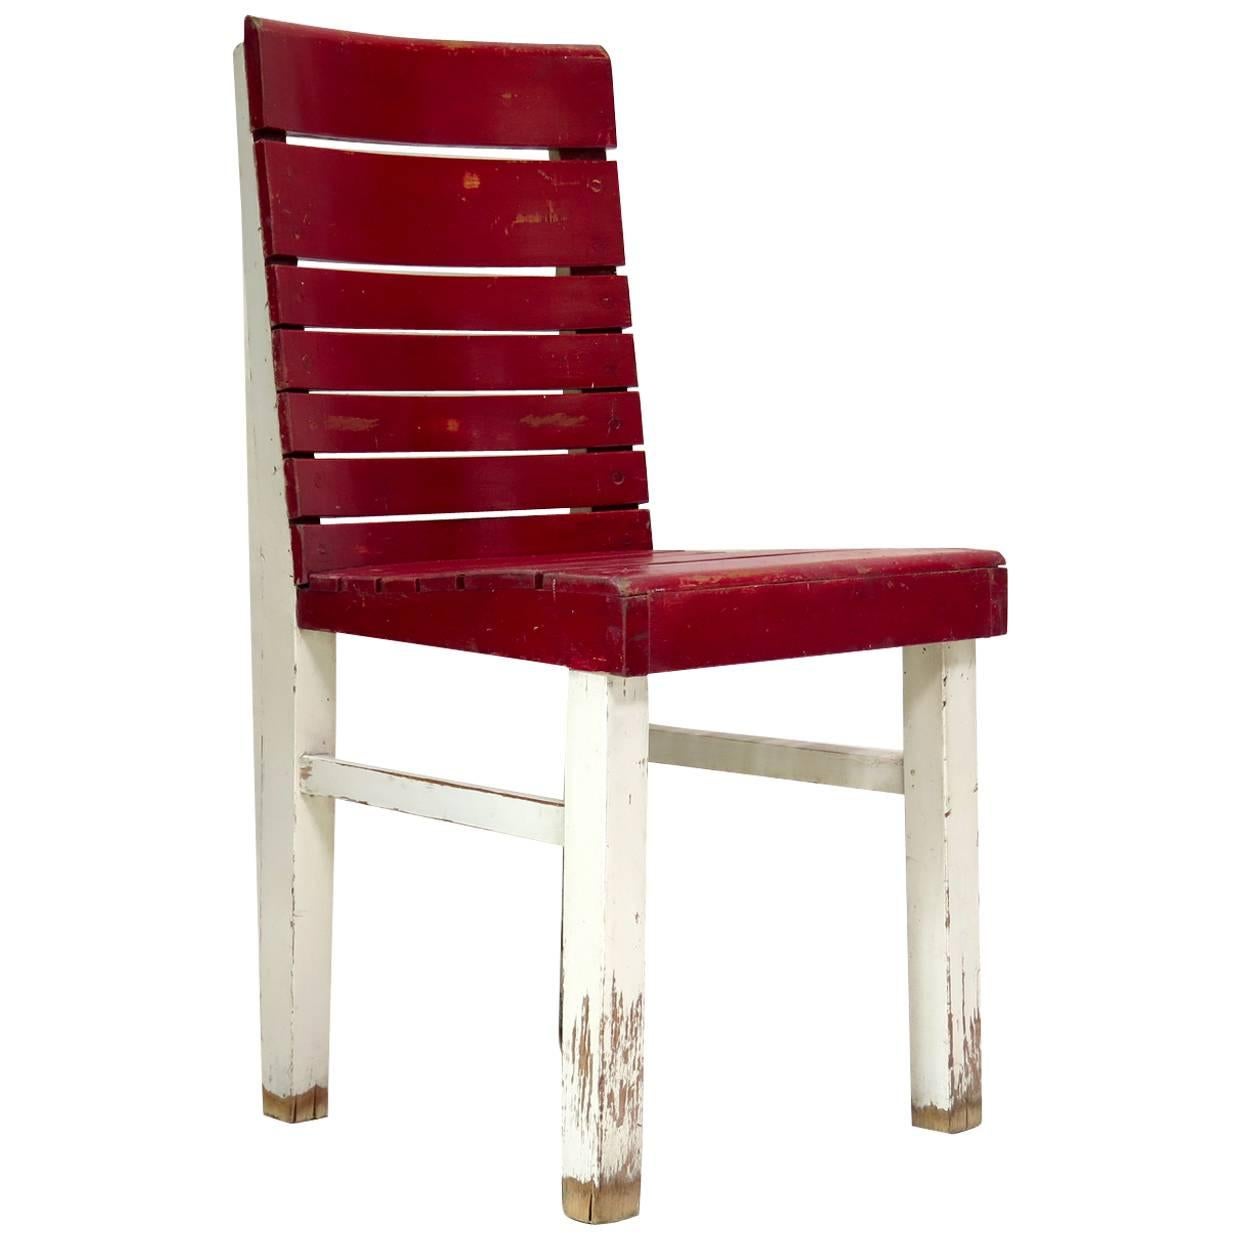 Red and White Painted "Fischel" Chair, France, circa 1920s-1930s